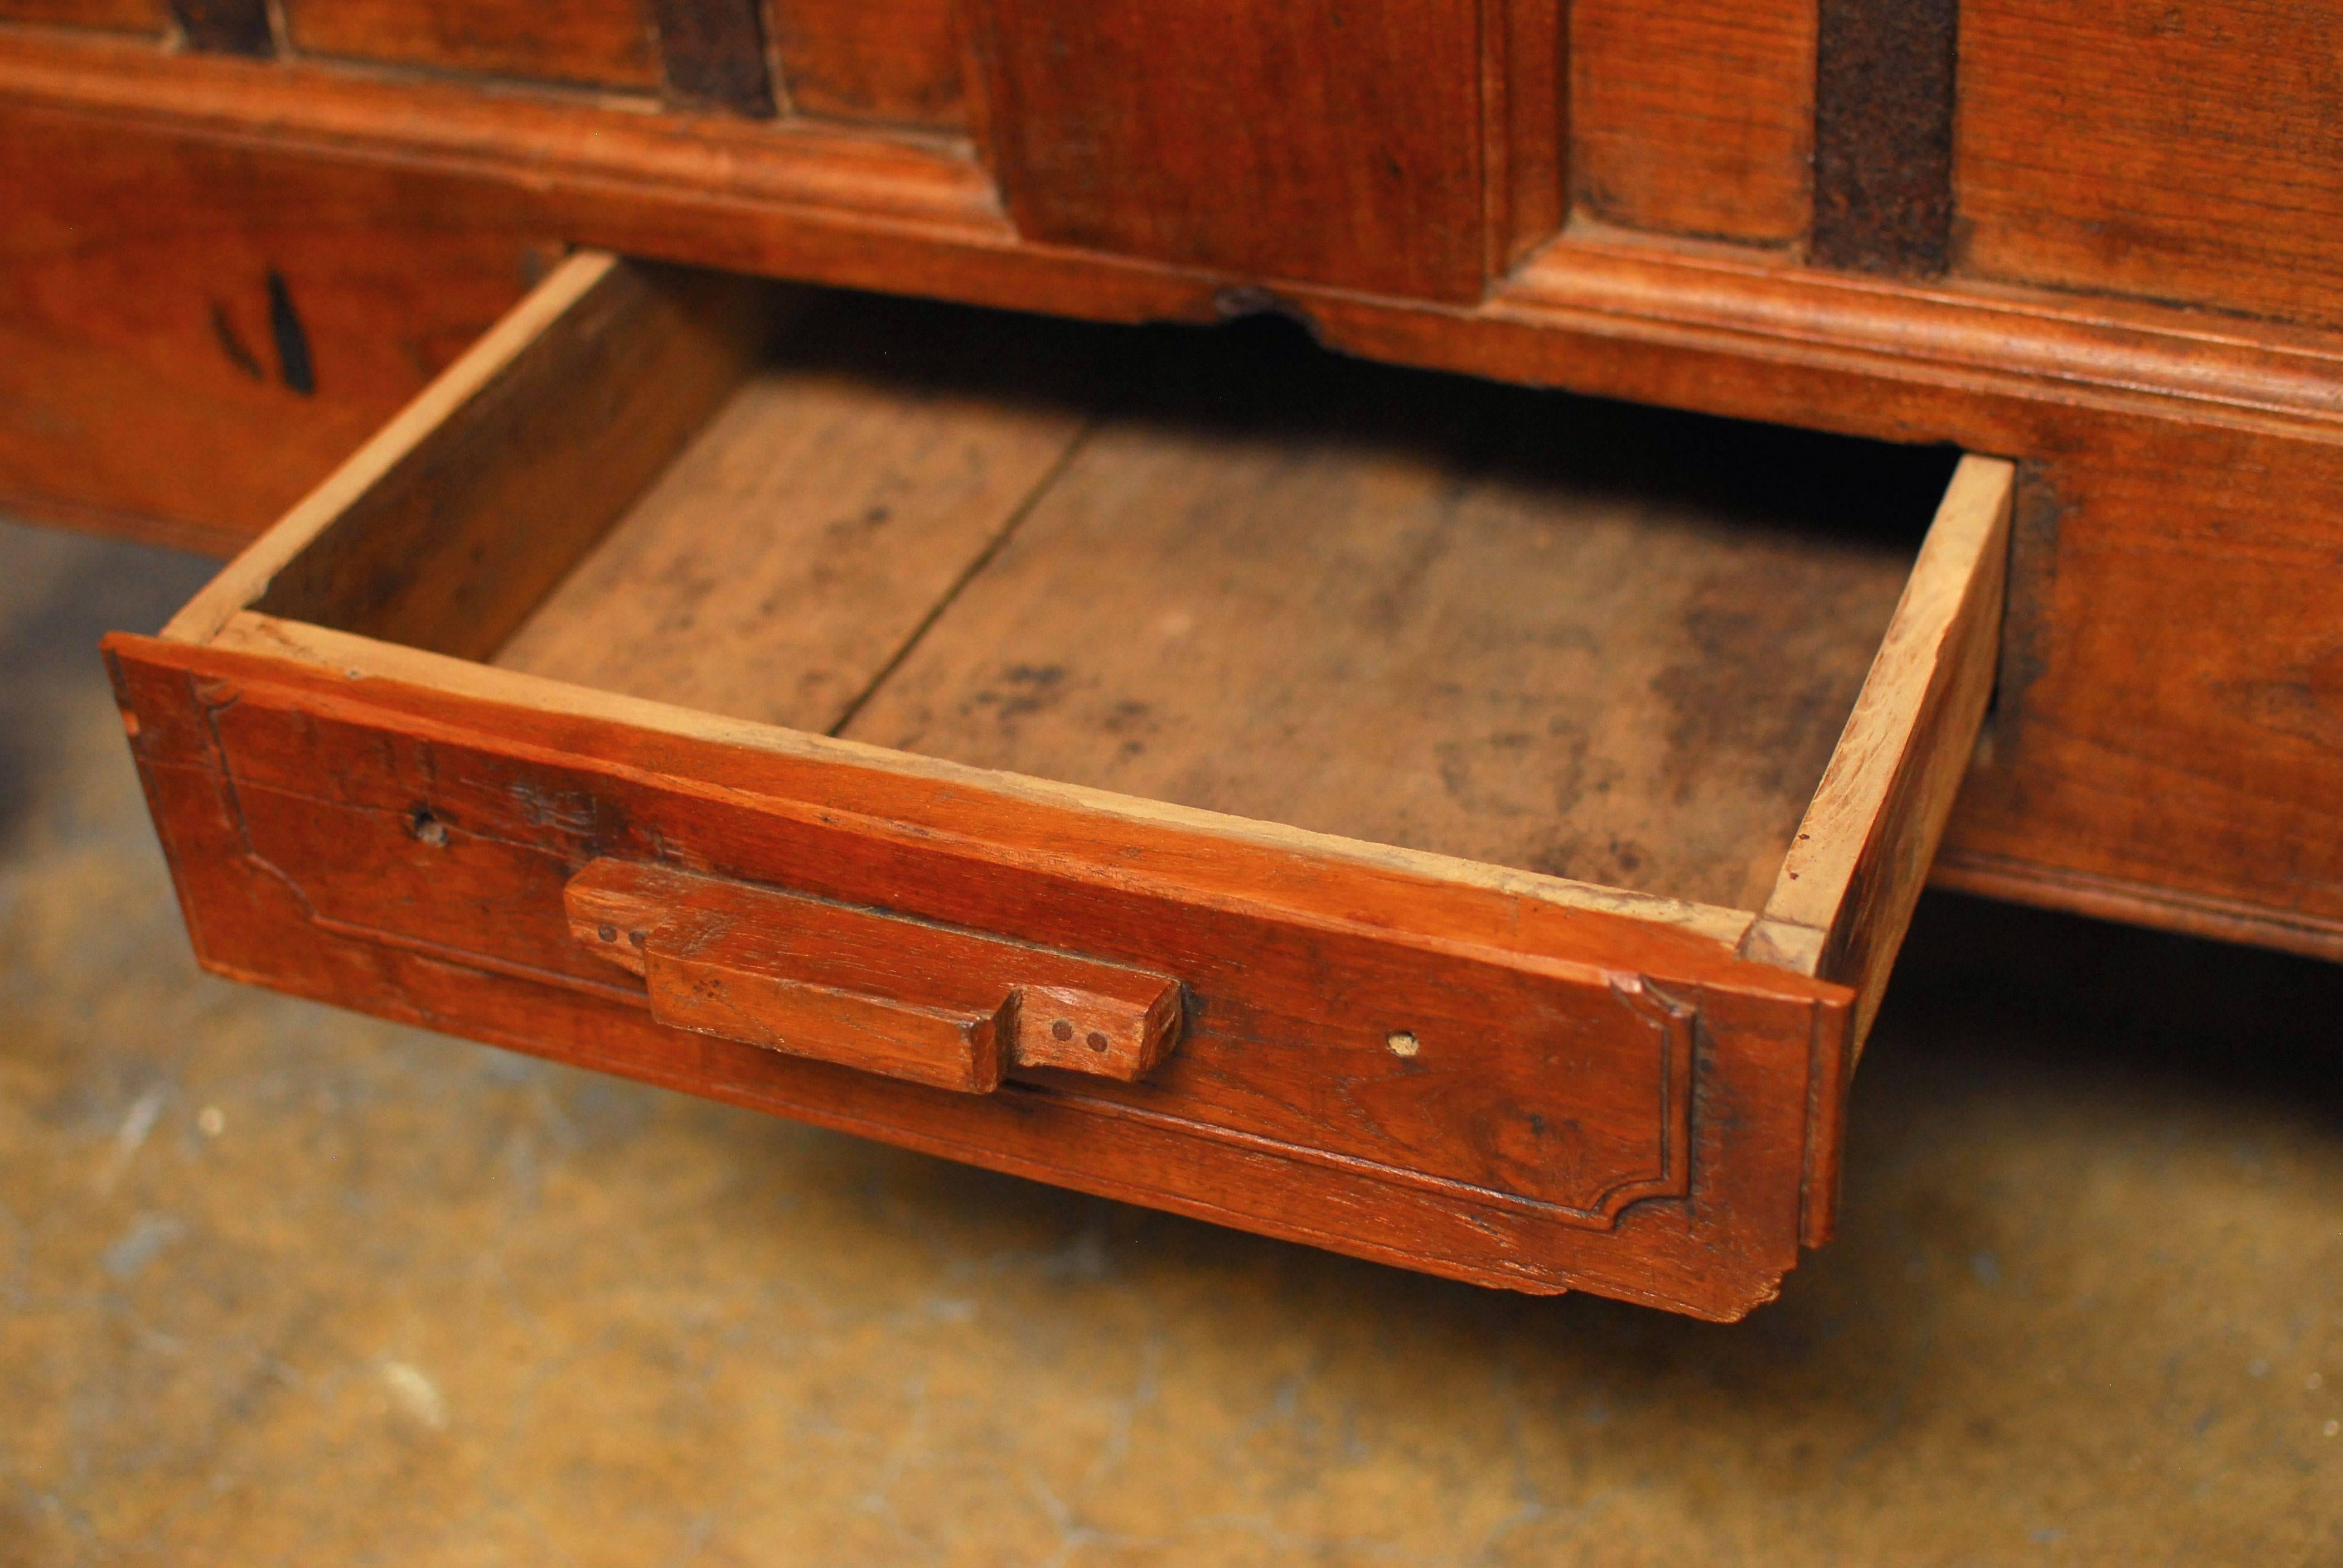 18th century dowry chest